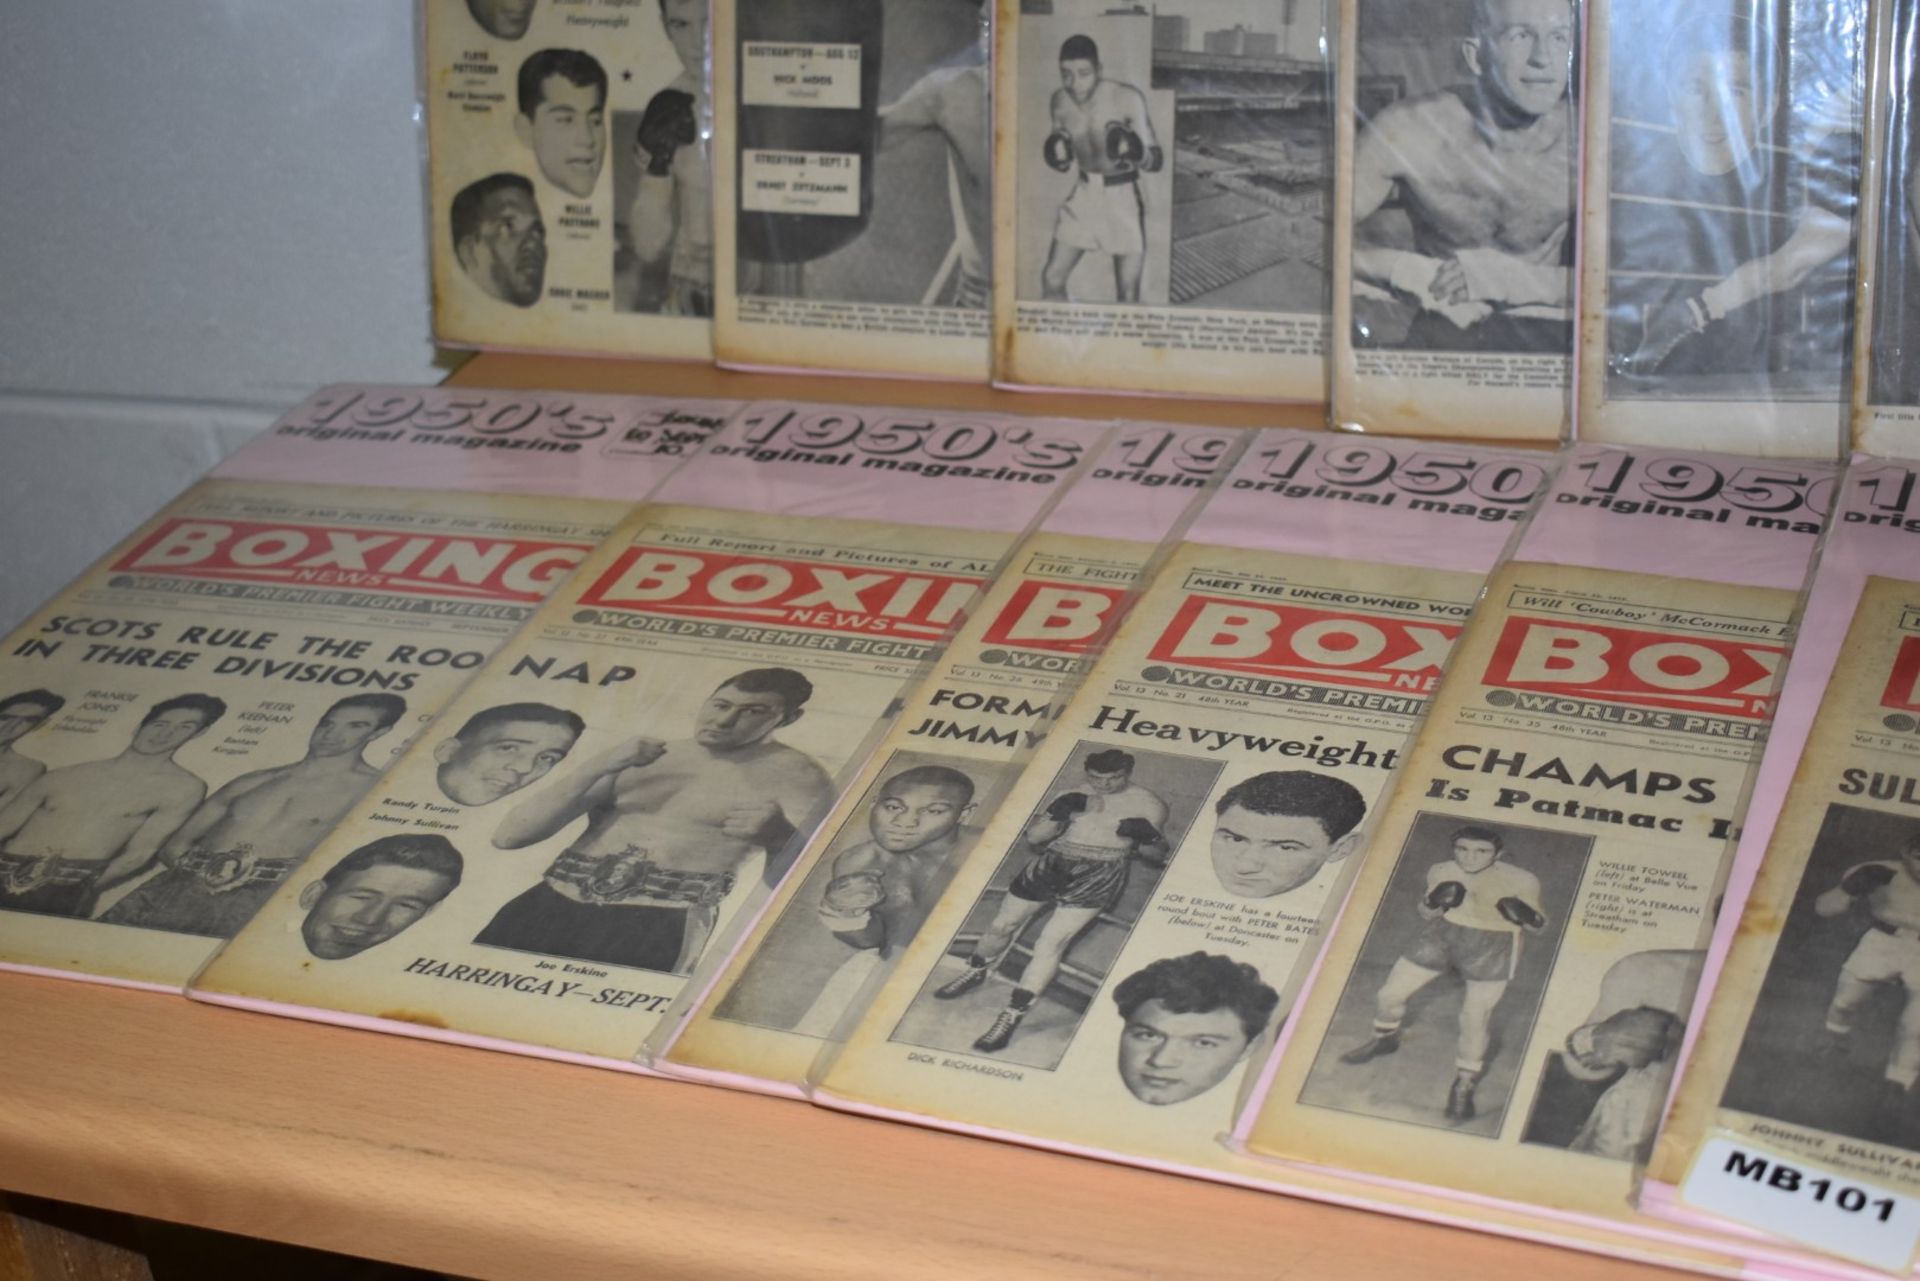 56 x Vintage Boxing News Magazines Dated 1955 to 1959 - Ref MB100/101/102 - Individually Packaged - Image 3 of 28